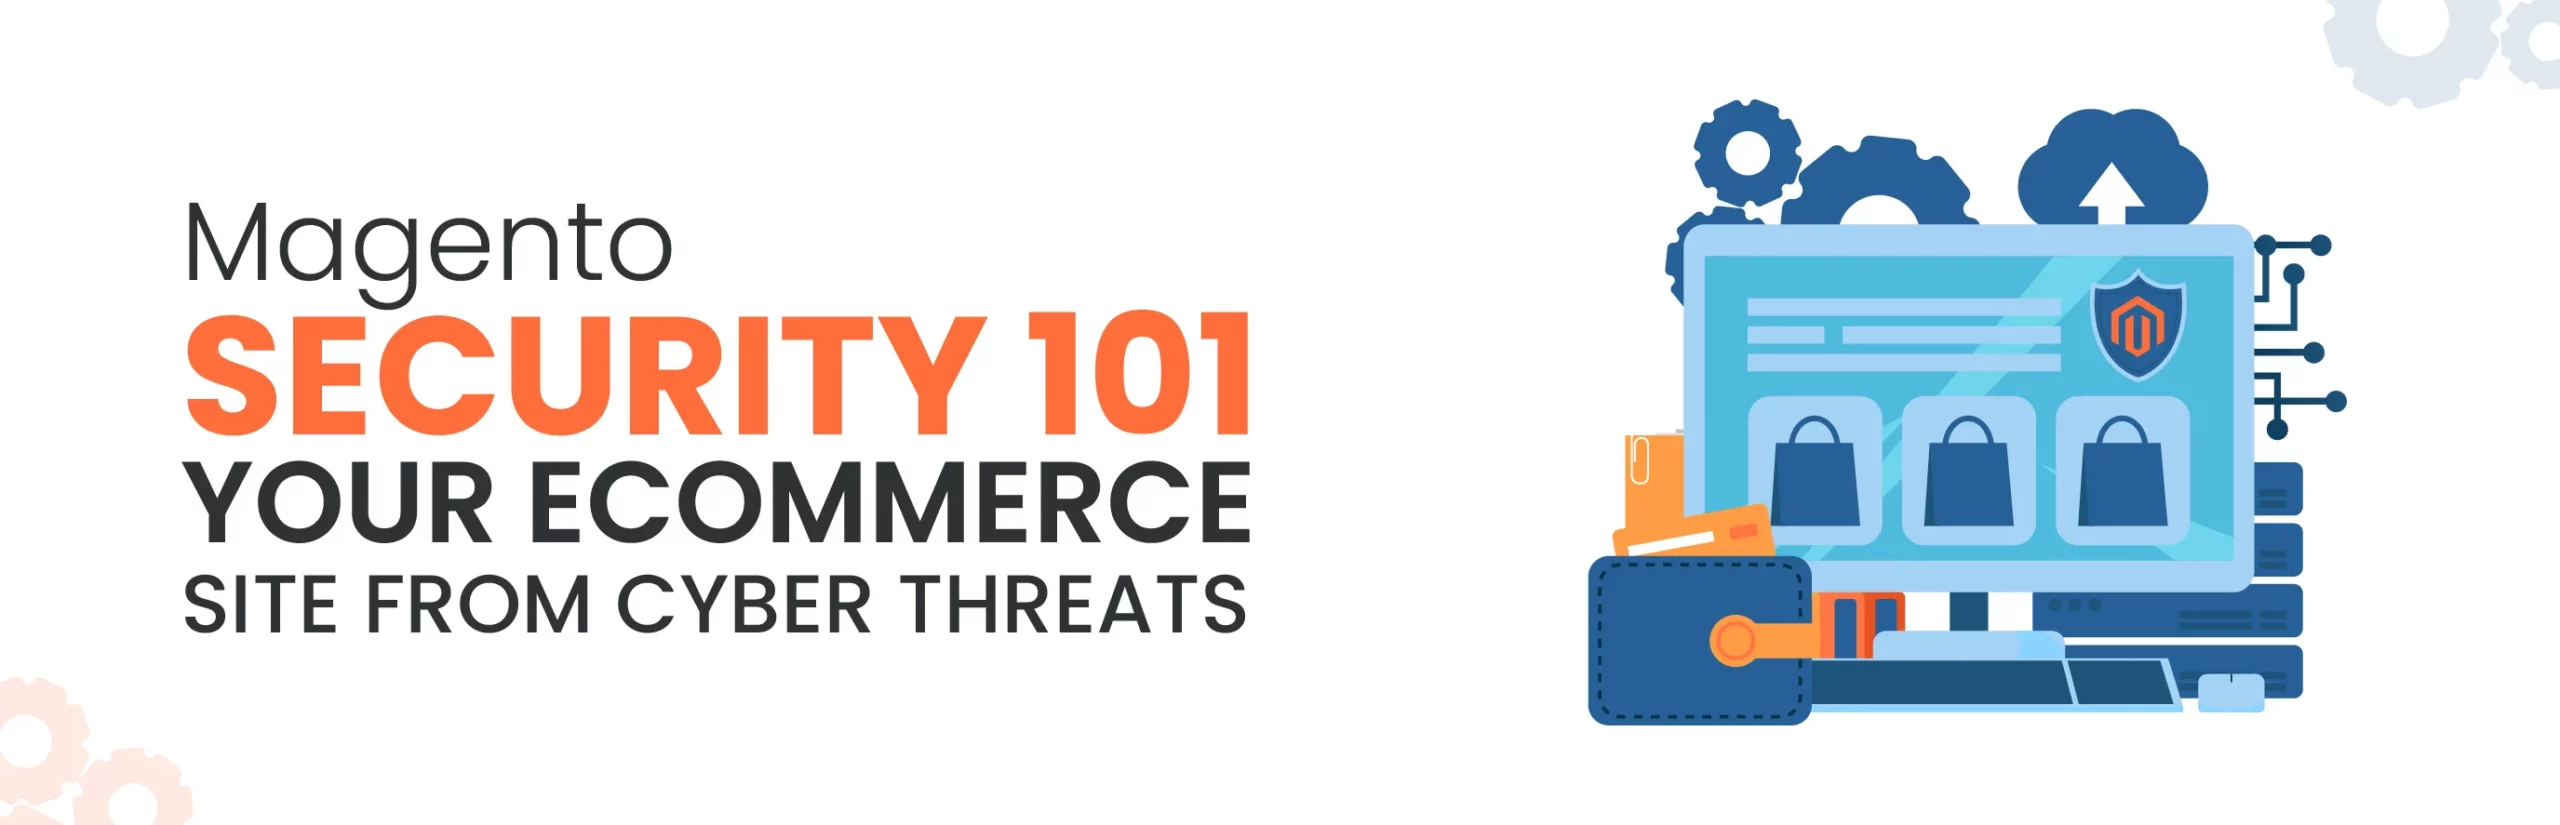 Magento Security 101: Protecting Your E-commerce Site from Cyber Threats